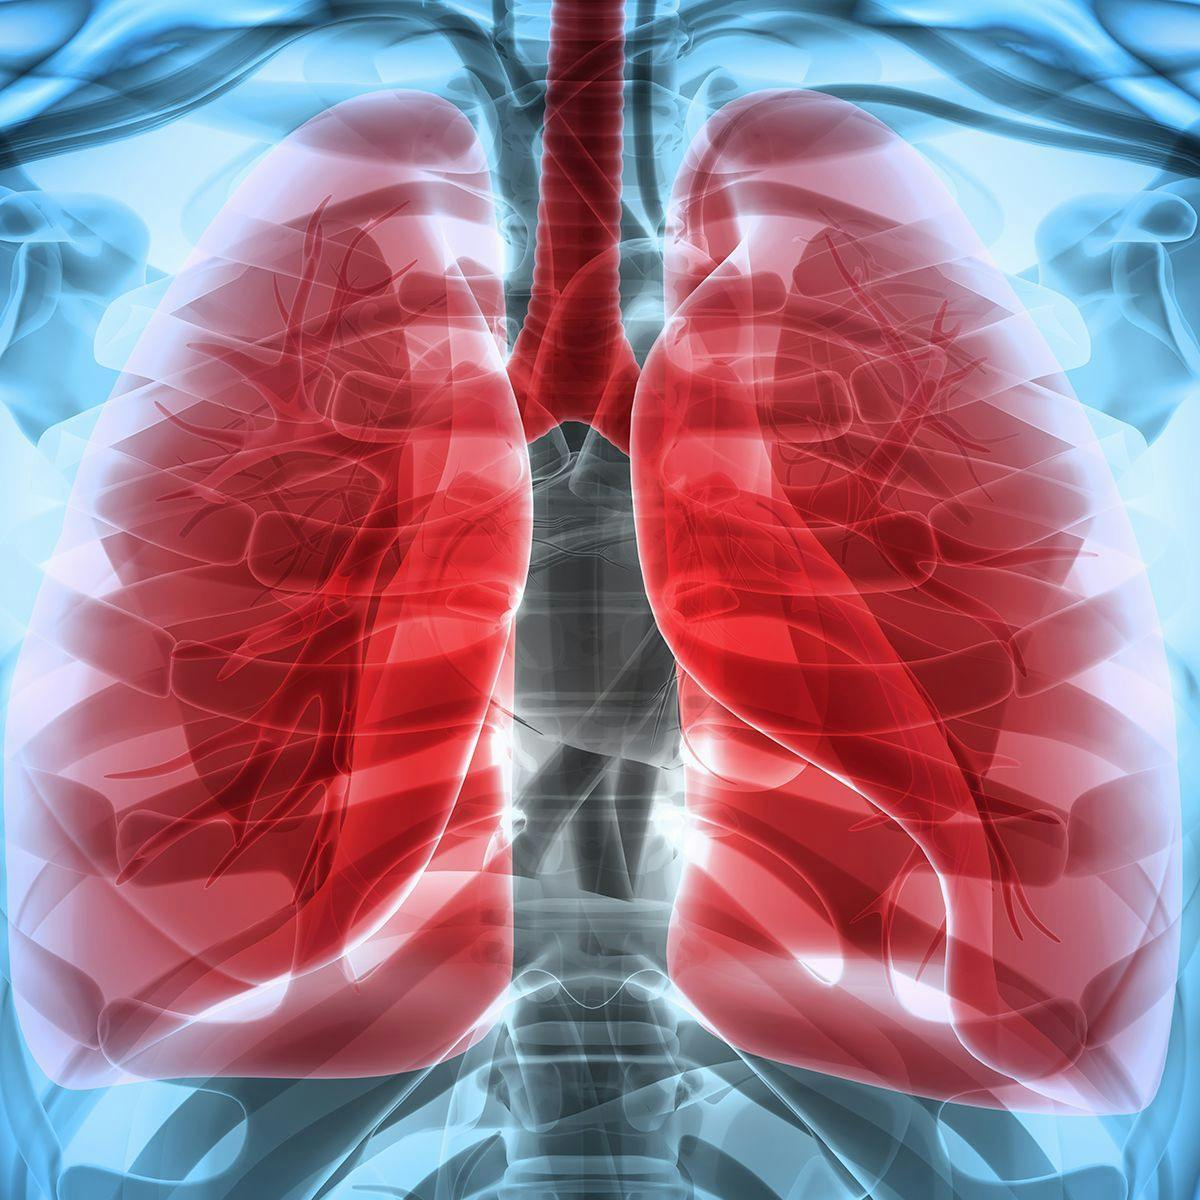 Growth of Targeted Therapy Requires More Nuanced Treatment Considerations in NSCLC